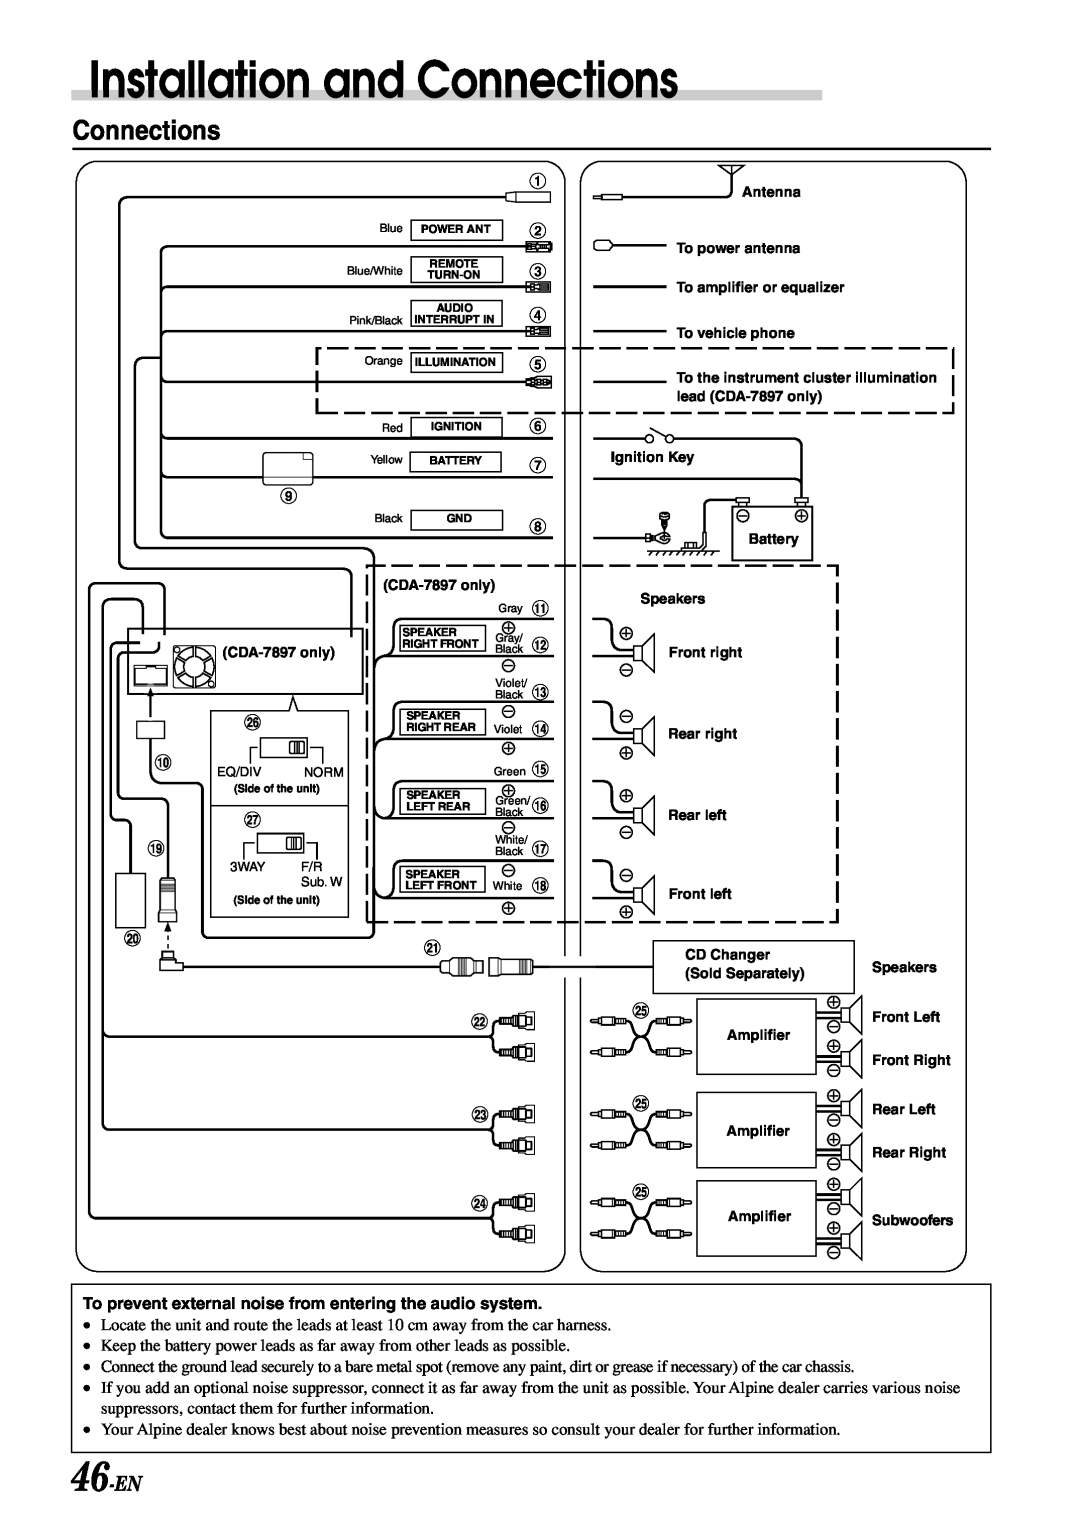 Alpine CDA-7897 owner manual 46-EN, Installation and Connections 